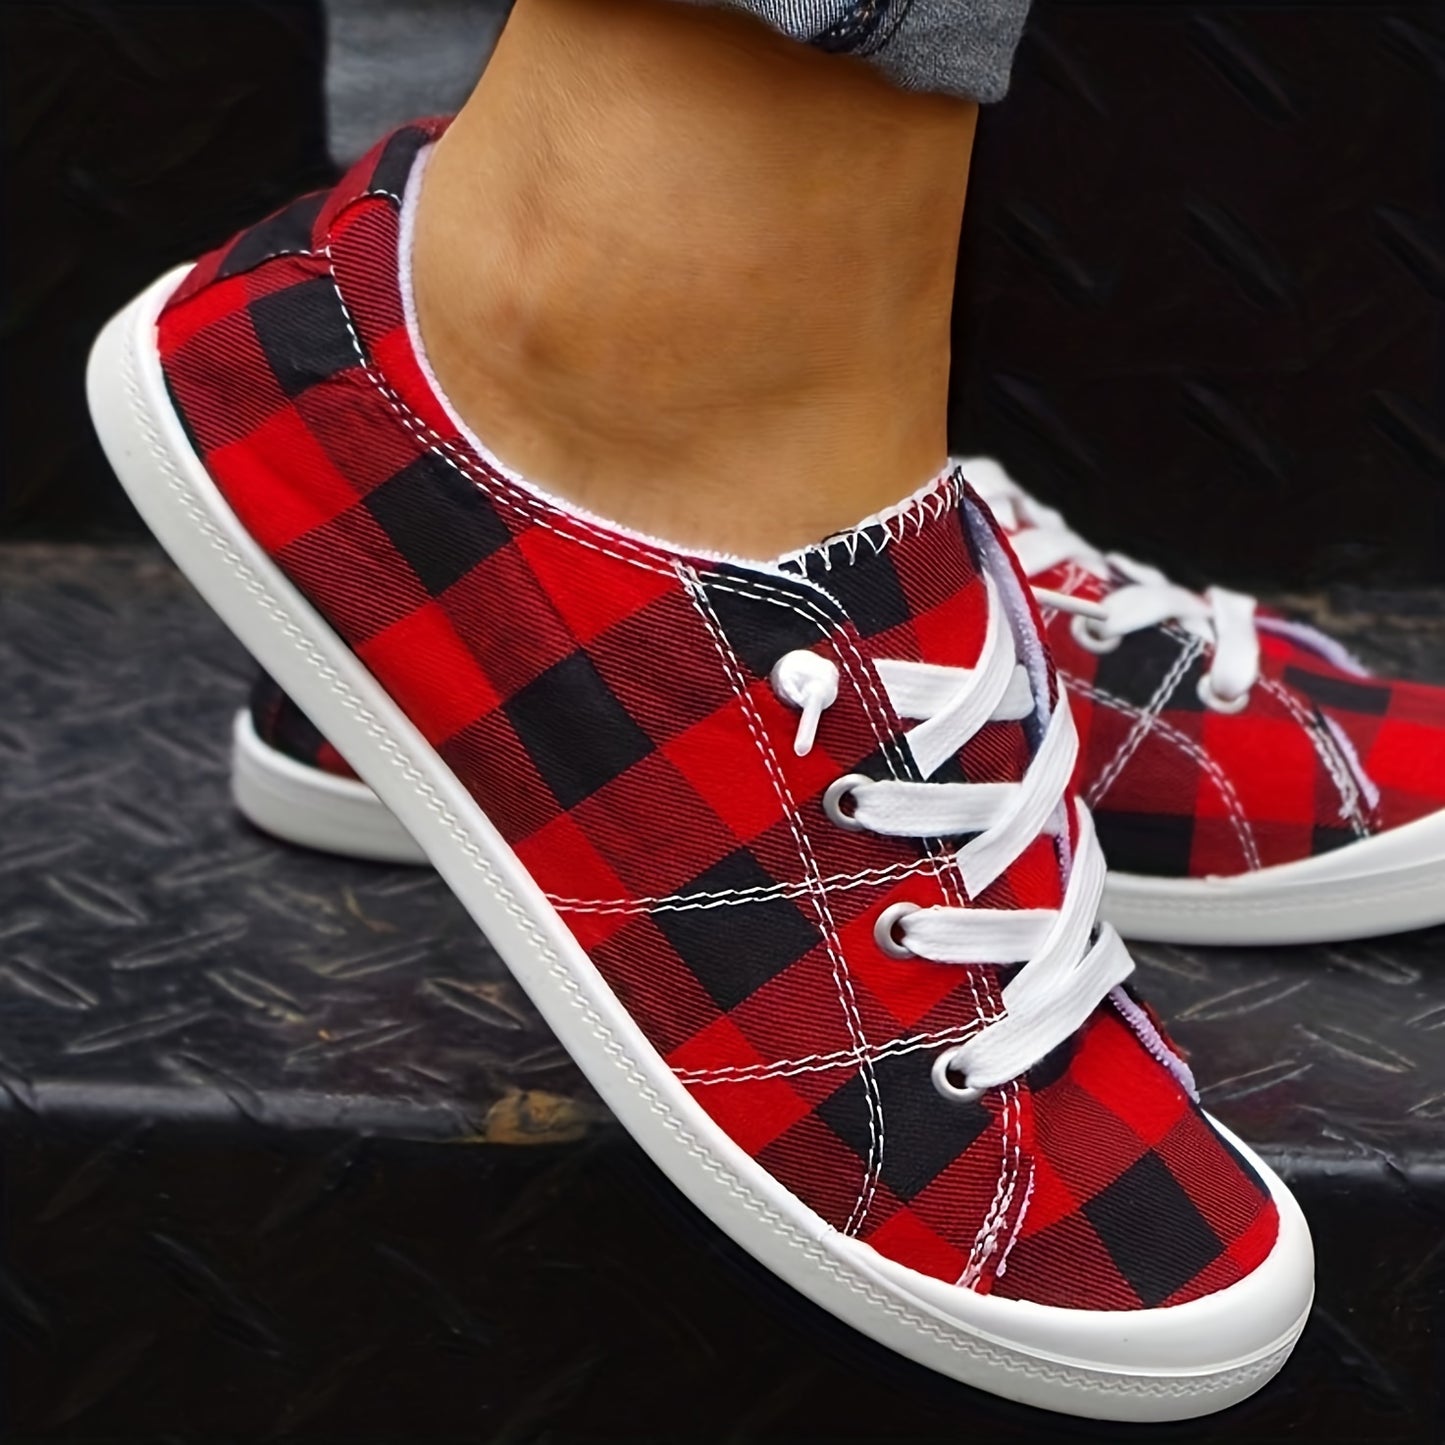 Plaid Pattern Canvas Shoes, Casual Low Top Sneakers